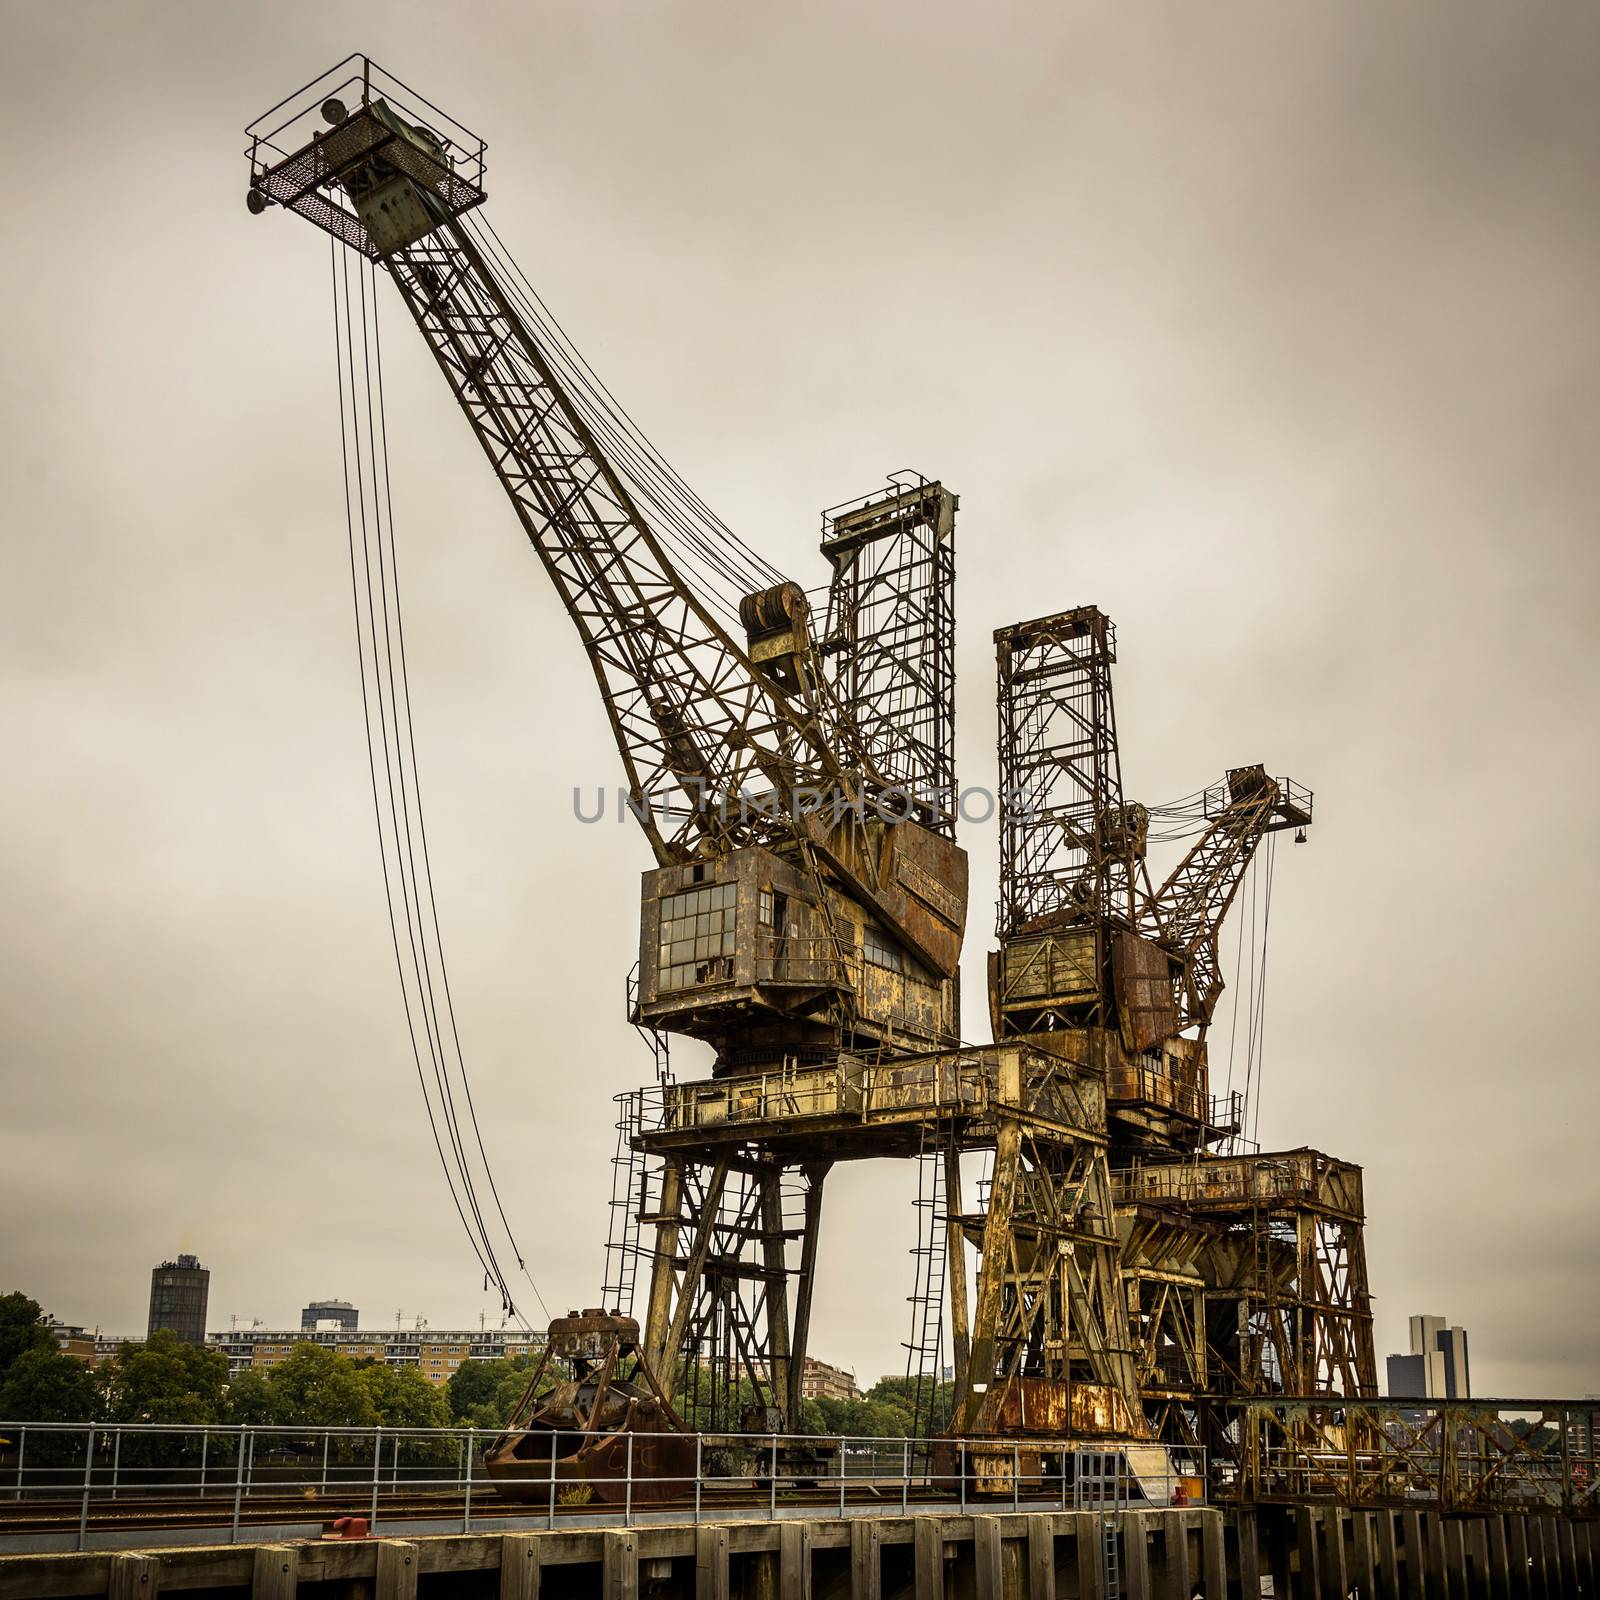 Rusty cranes at Battersea power station in London, UK